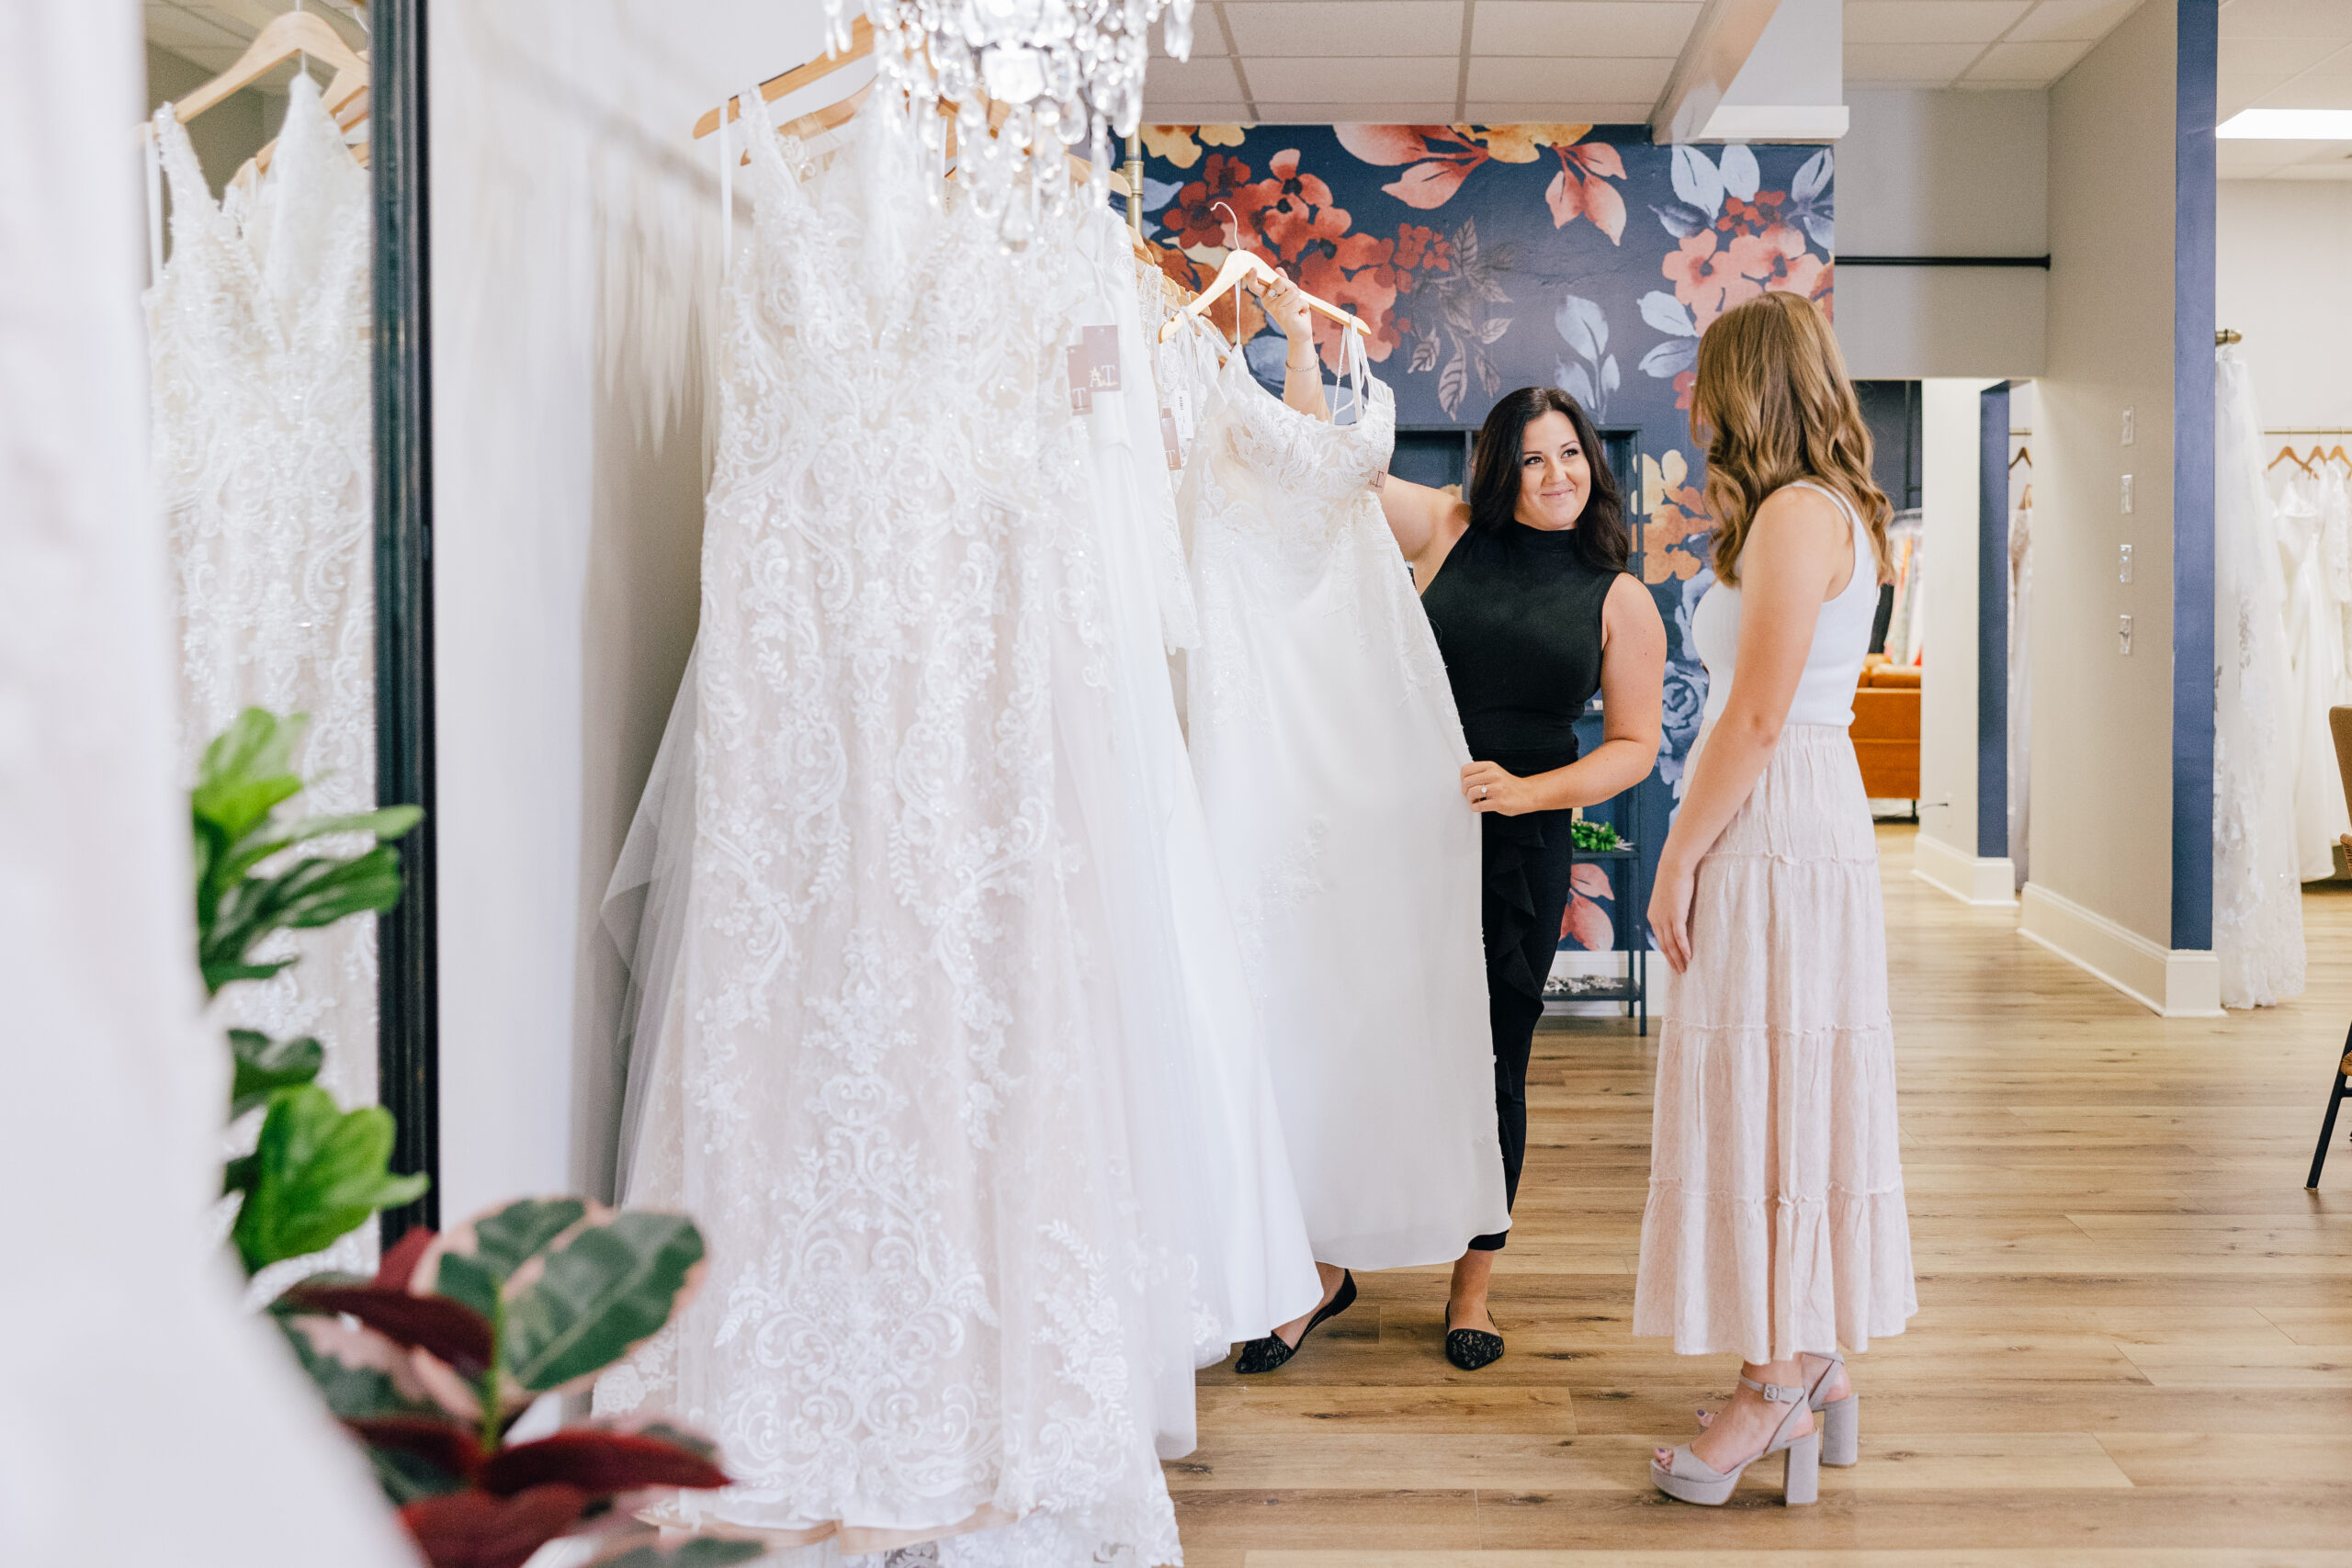 stylist displaying bridal dress to bride to be